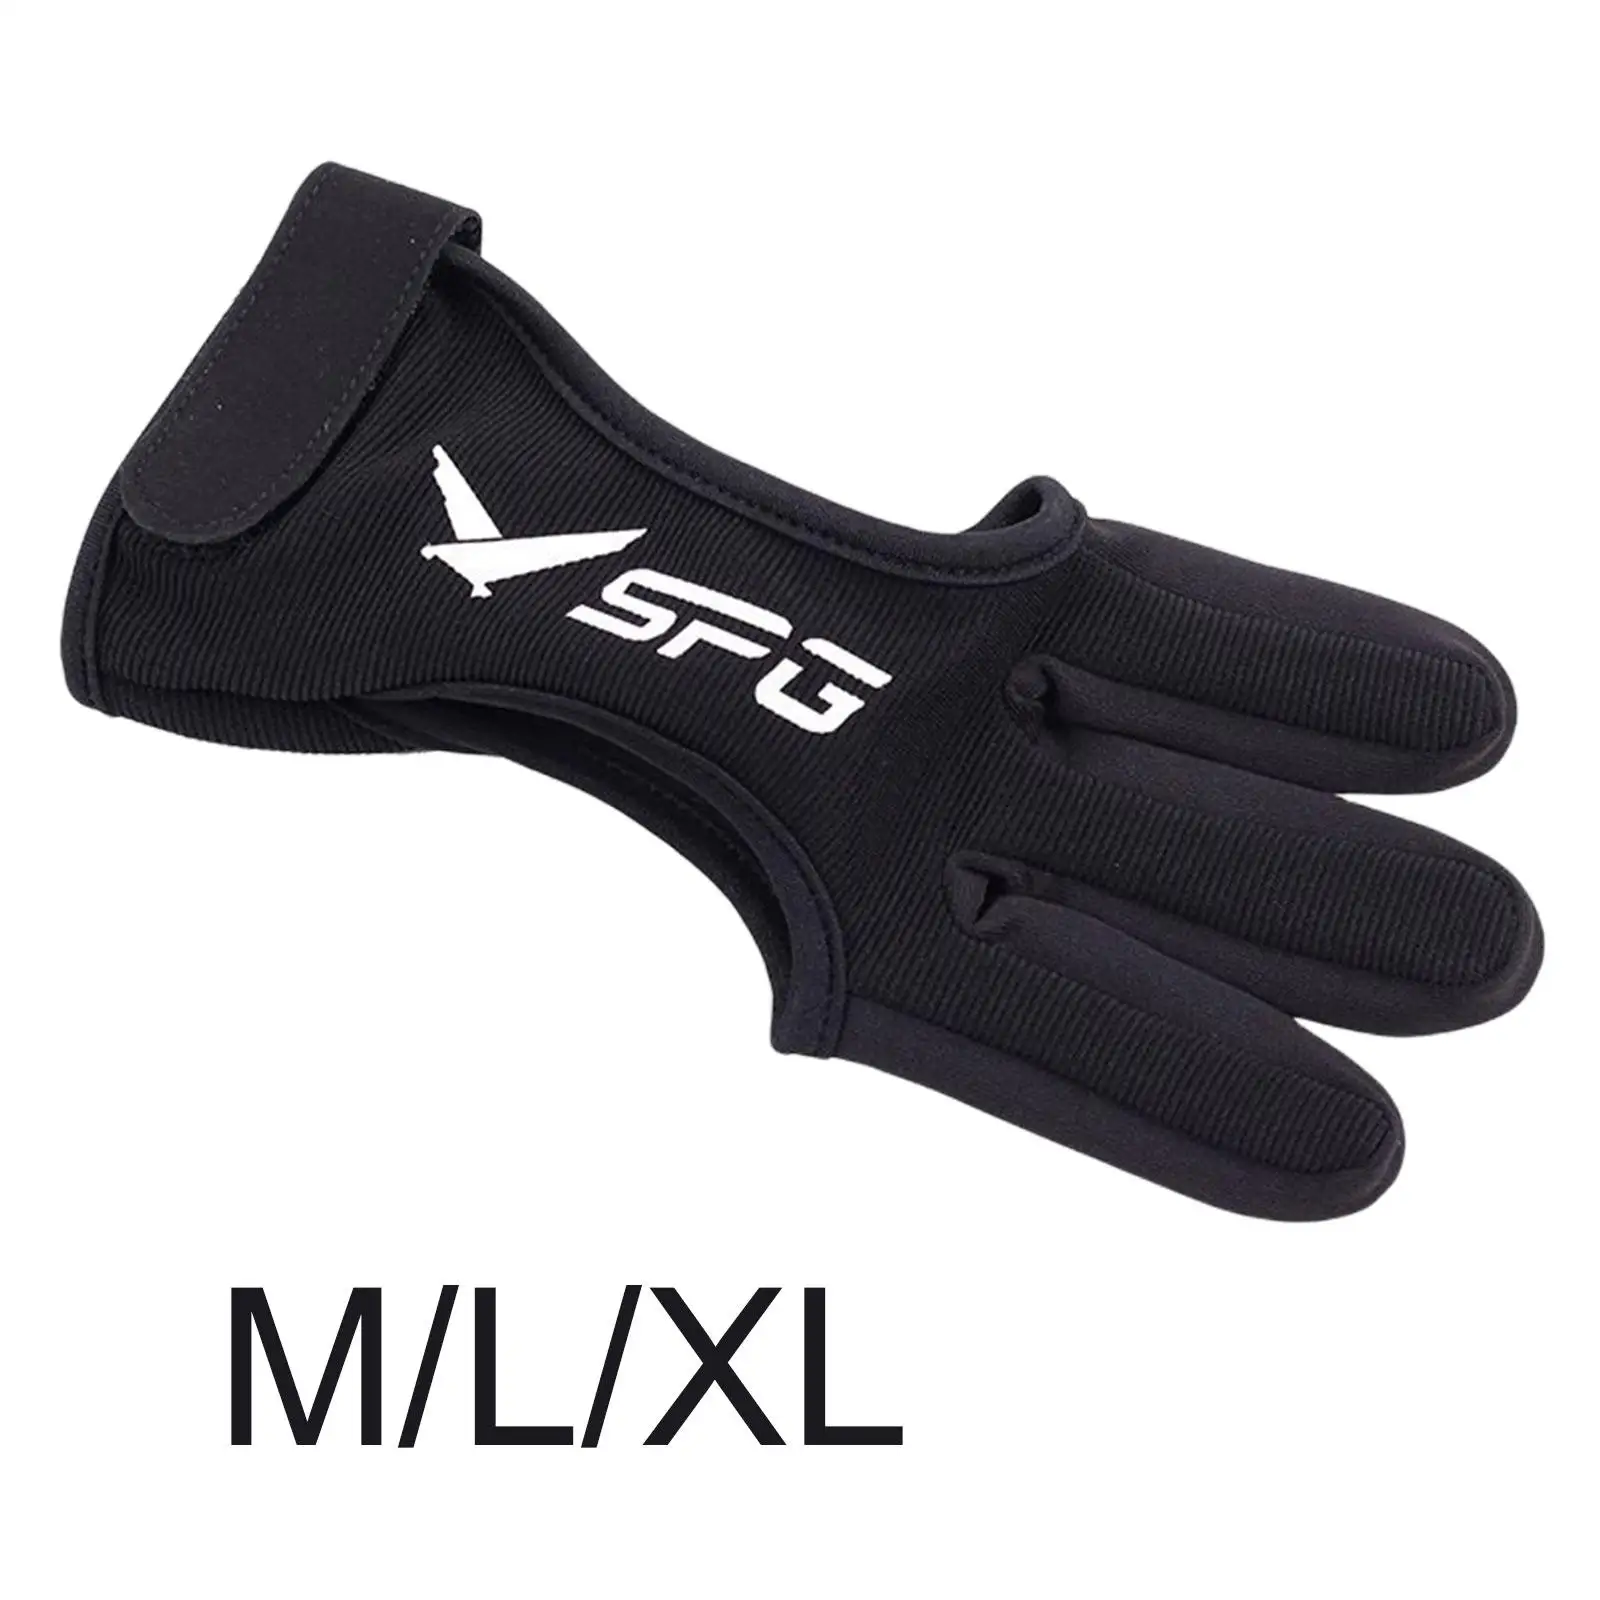 Glove 3 Fingers Compound Recurve Bow Guard Hunting Glove